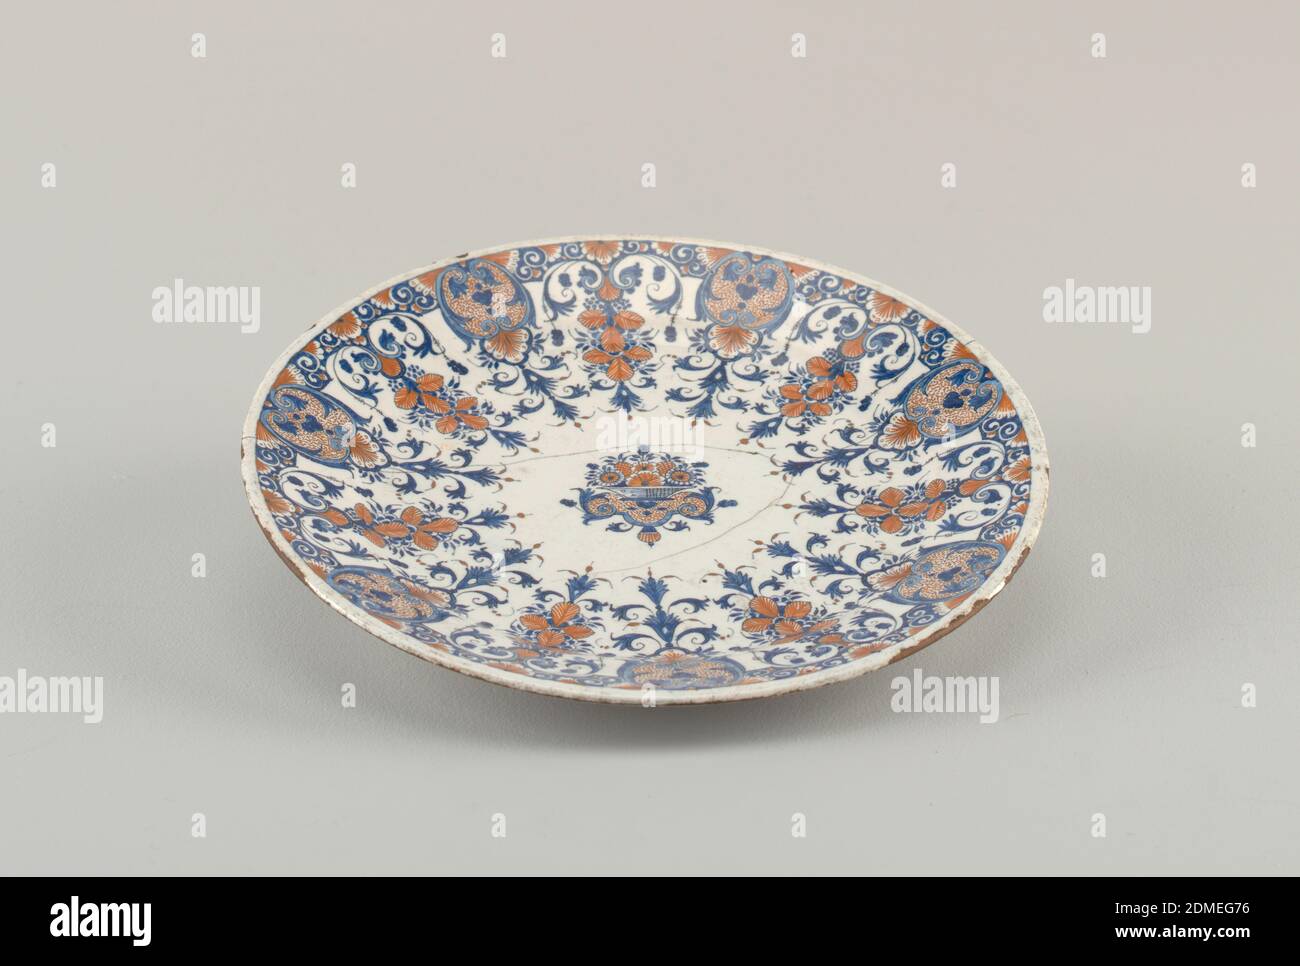 Plate, Tin-glazed thrown earthenware, Circular; lambrequin border and  central basket of flowers in terracotta color and blue on white ground.,  Rouen, France, 1710–30, ceramics, Decorative Arts, Plate Stock Photo - Alamy